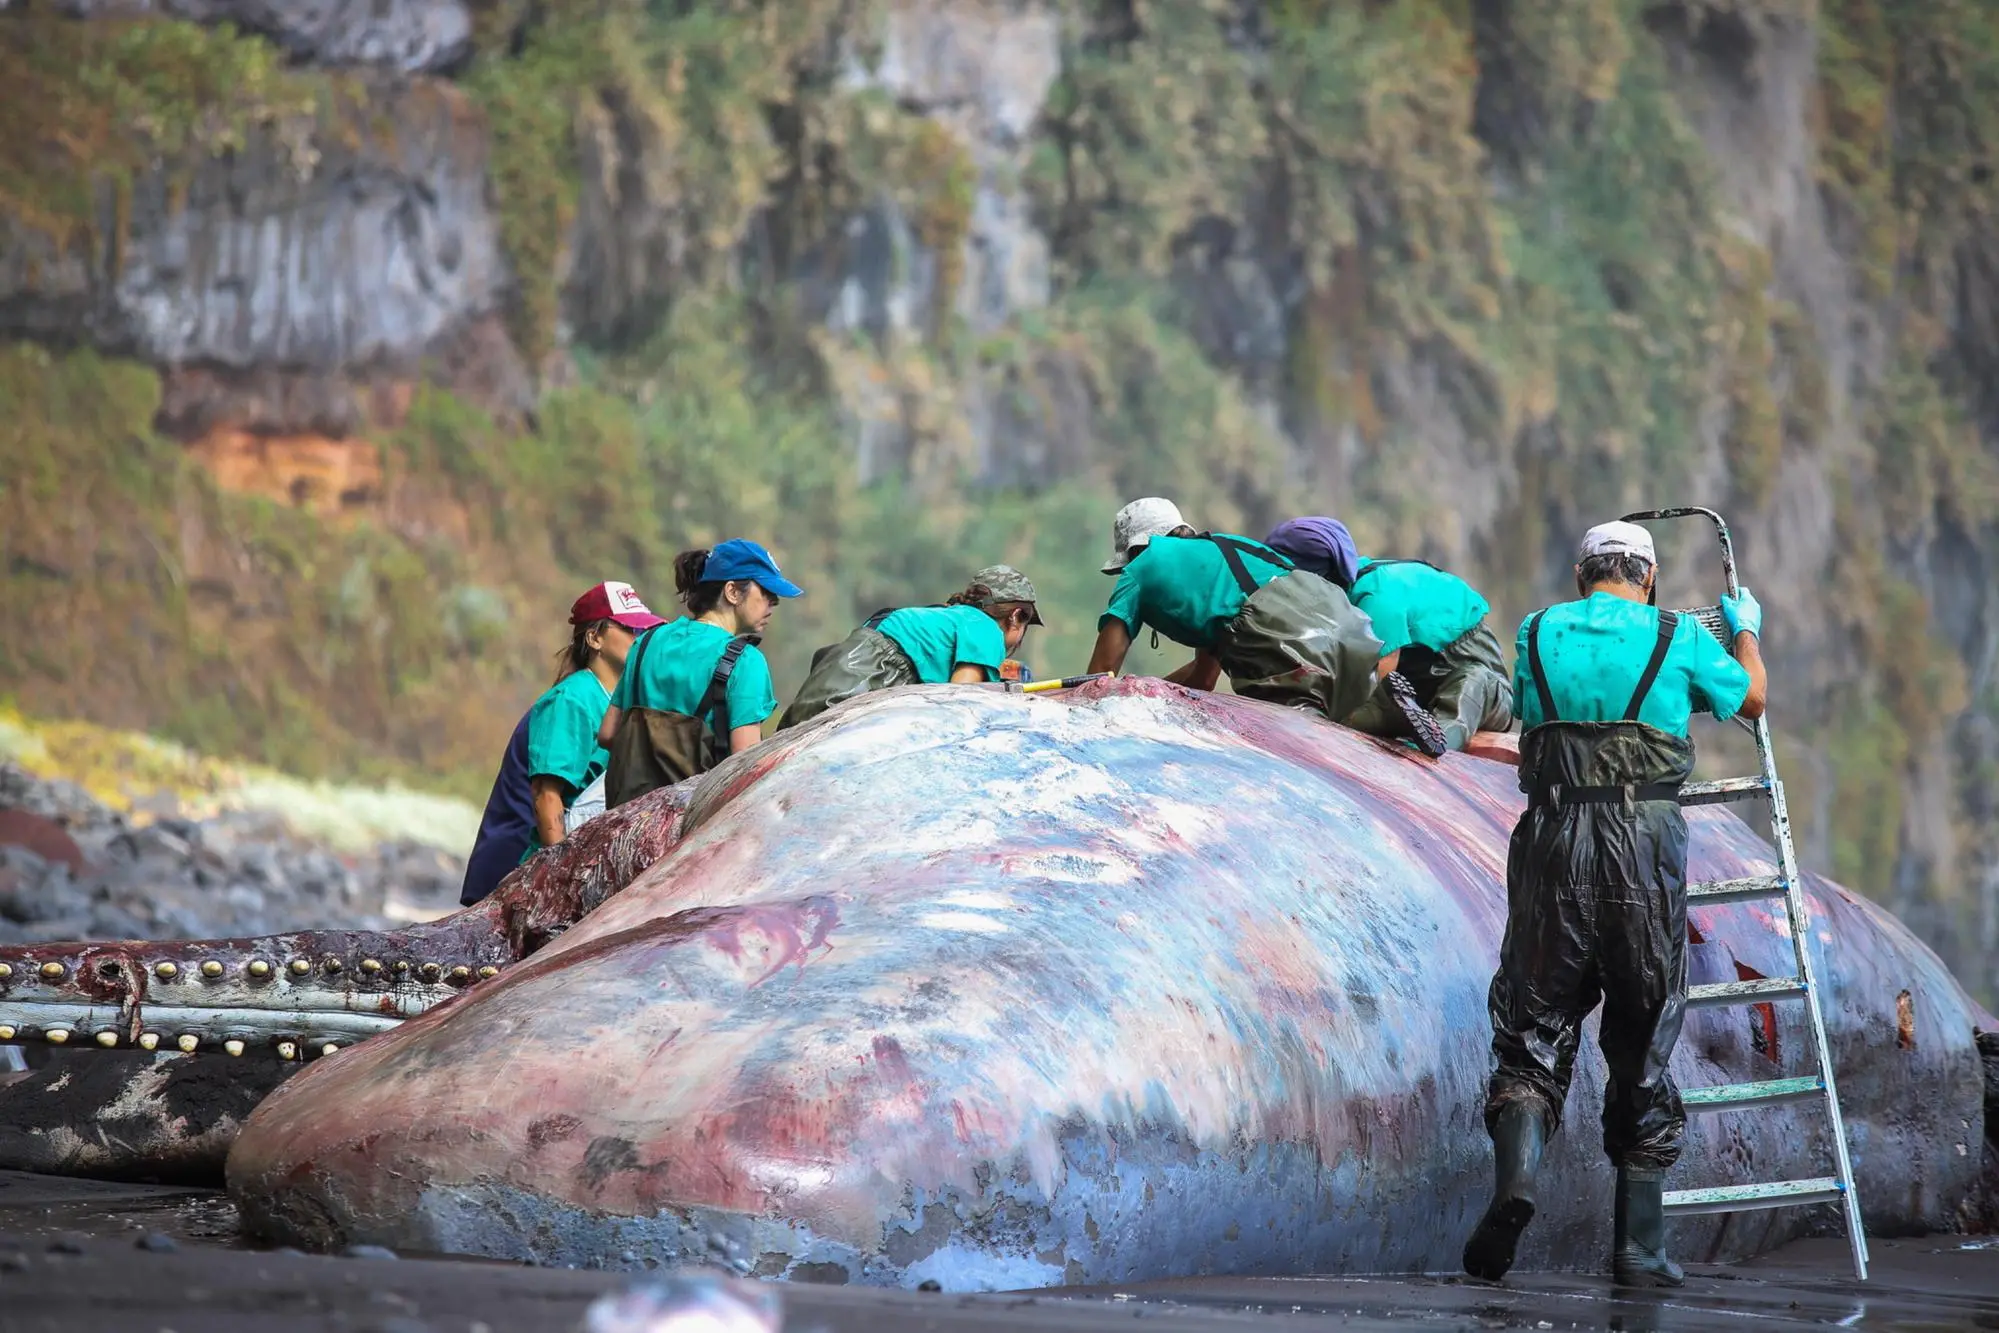 epa10647807 A group of workers from the veterinarian forensic department of the University Institute for Animal Health of the ULPGC (Las Palmas de Gran Canaria University) examine a dead sperm whale beached on Nogales beach in La Palma, Canary Islands, Spain, 23 May 2023. EPA/LUIS G MORERA